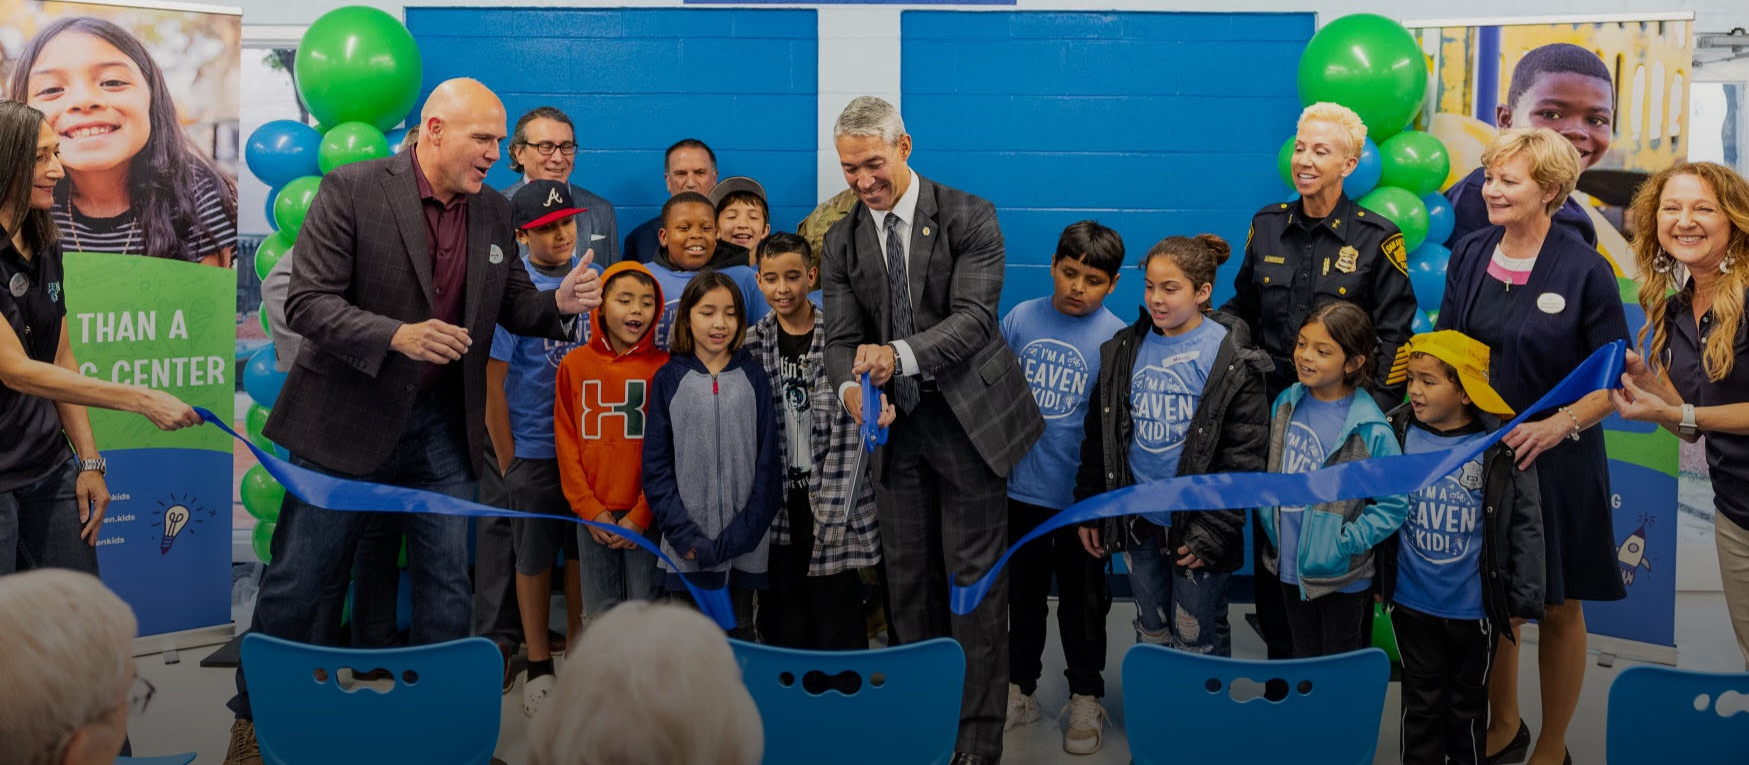 Leaven Kids opens its first learning center in San Antonio, Texas